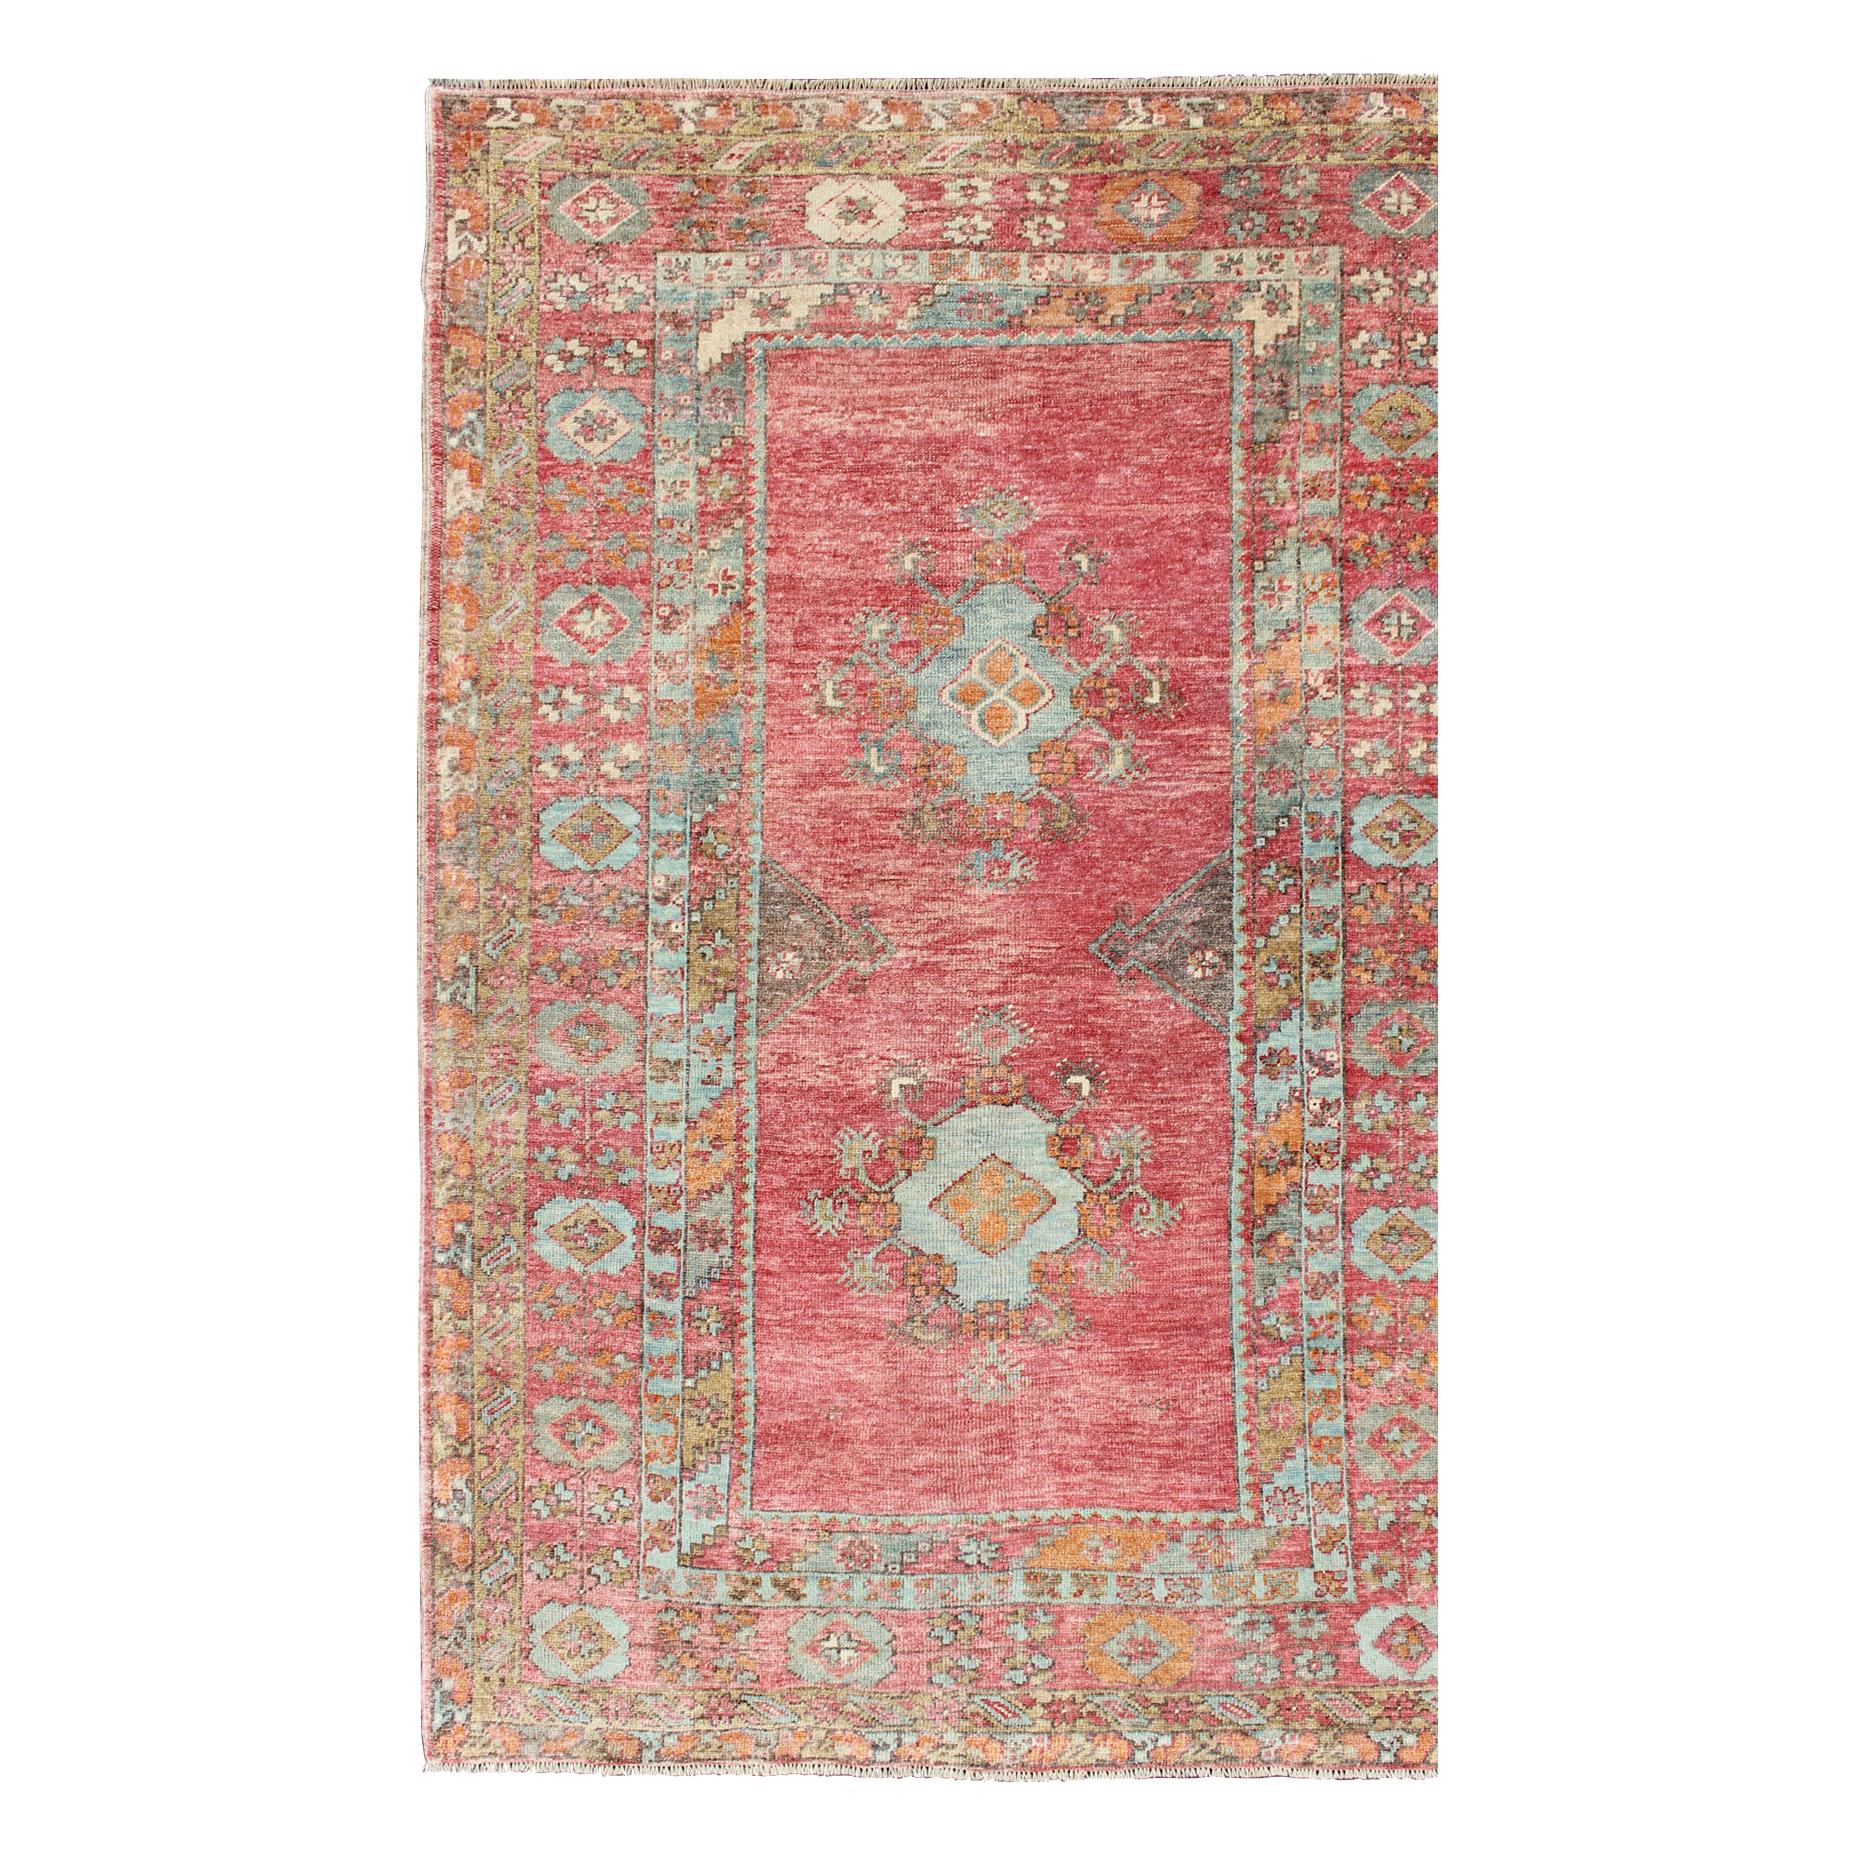 Antique Oushak with Coral Pink, Orange, Gray, Taupe Light Brown & Light Blue  For Sale